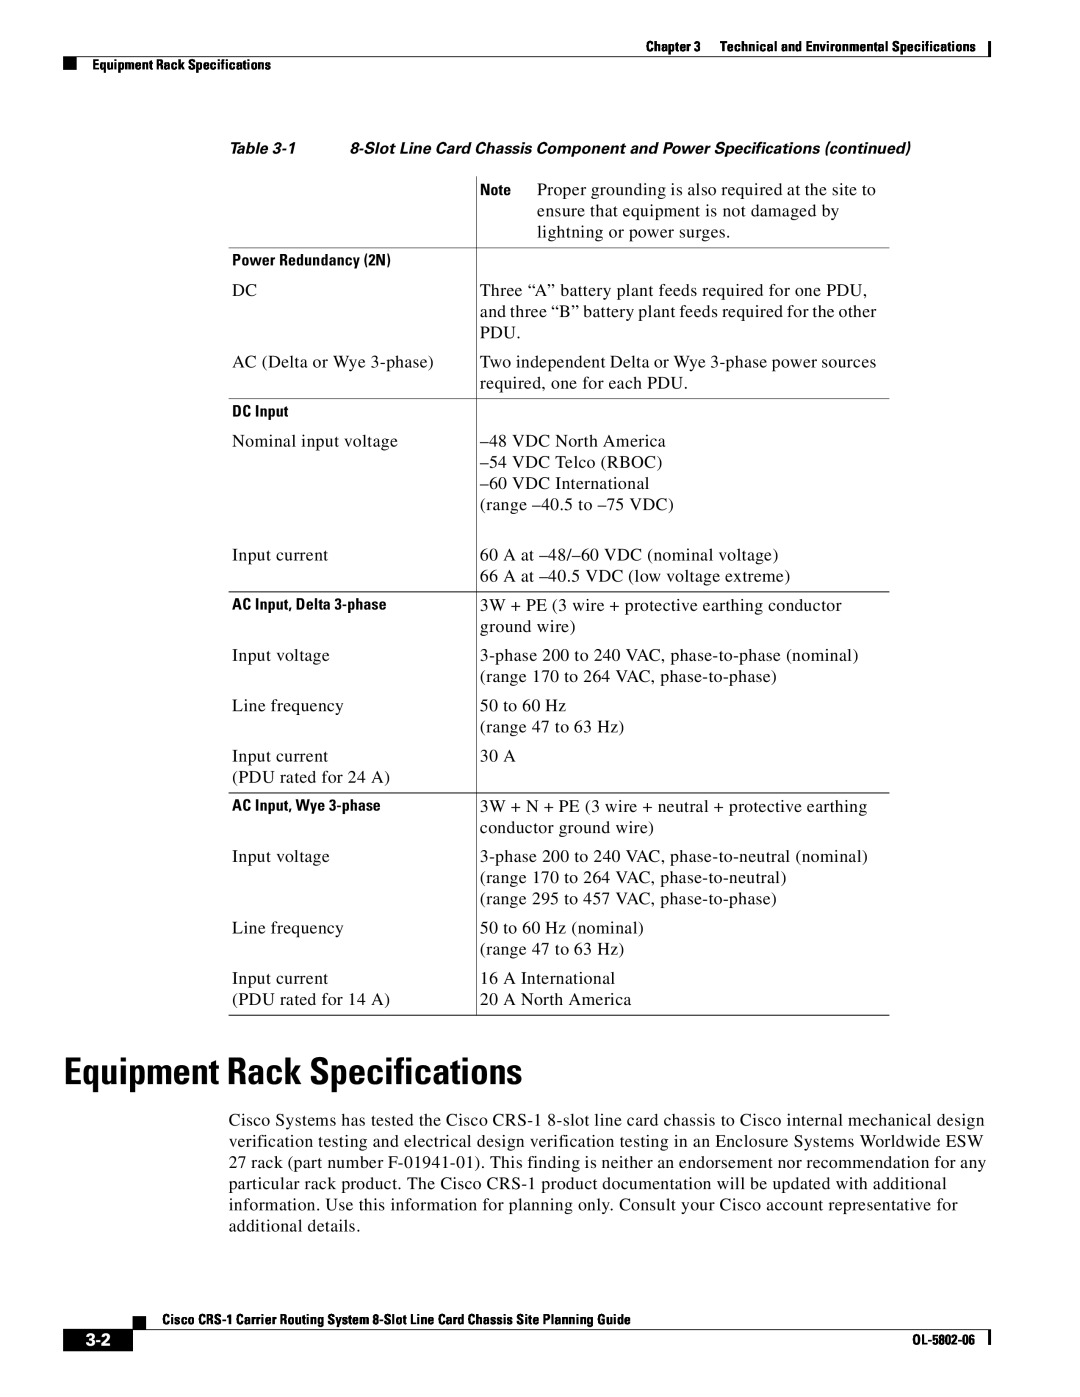 Cisco Systems CRS-1 manual Equipment Rack Specifications, Power Redundancy 2N, DC Input, AC Input, Delta 3-phase 